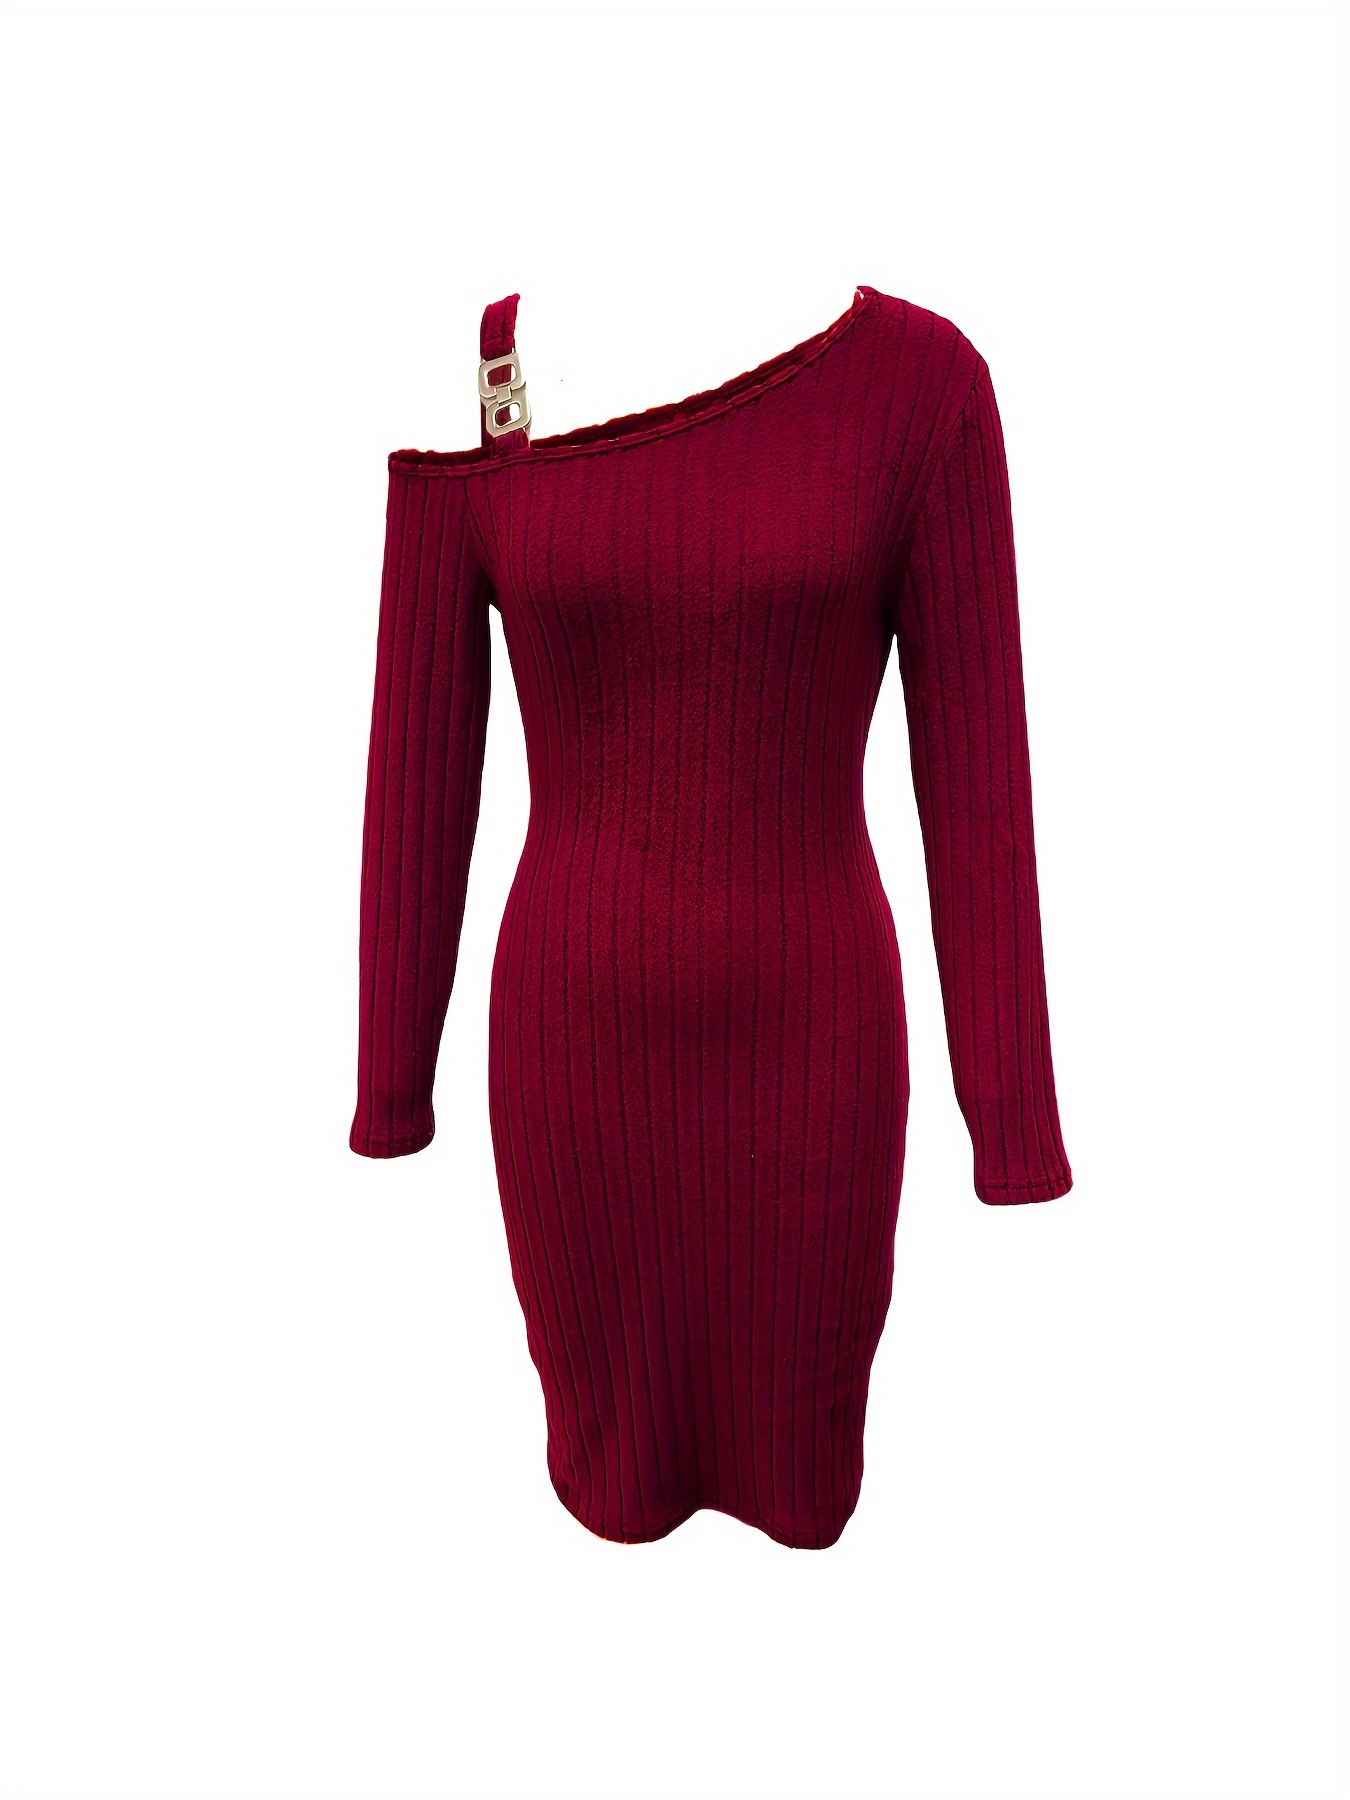 ribbed slanted shoulder dress party wear solid long sleeve mini dress womens clothing details 10